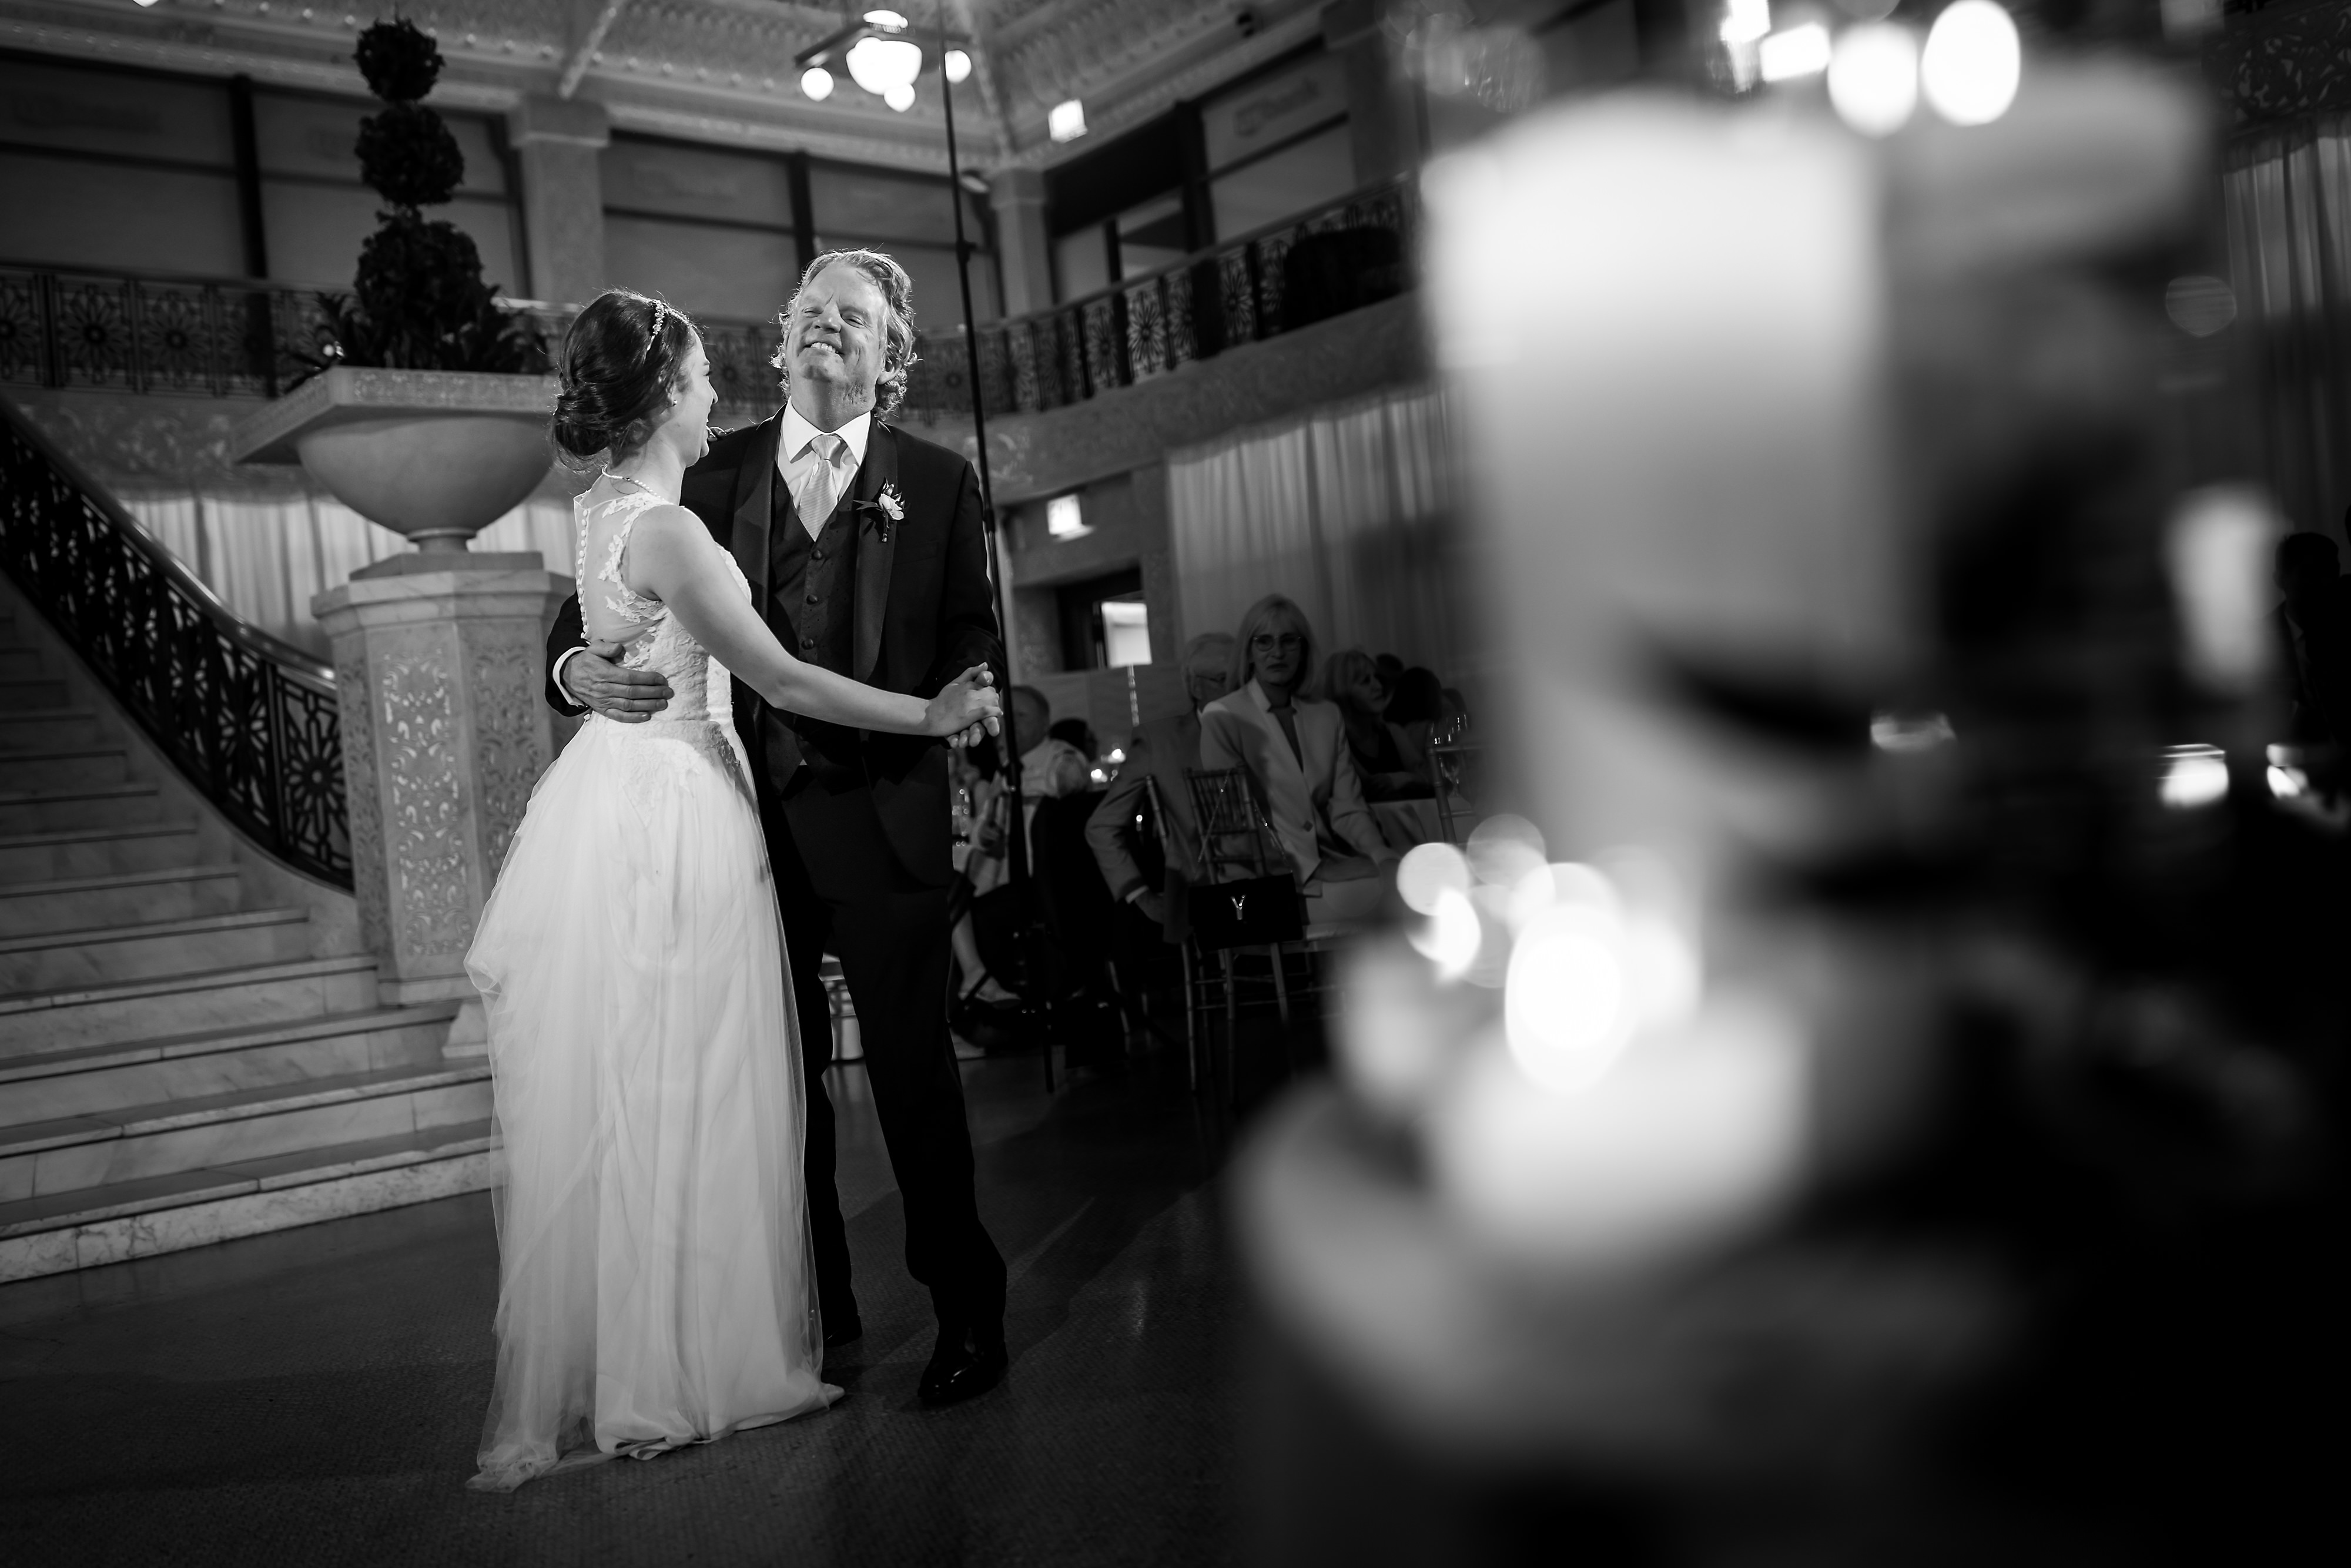 Father of the bride dances with daughter during wedding reception at the Rookery Building in Chicago